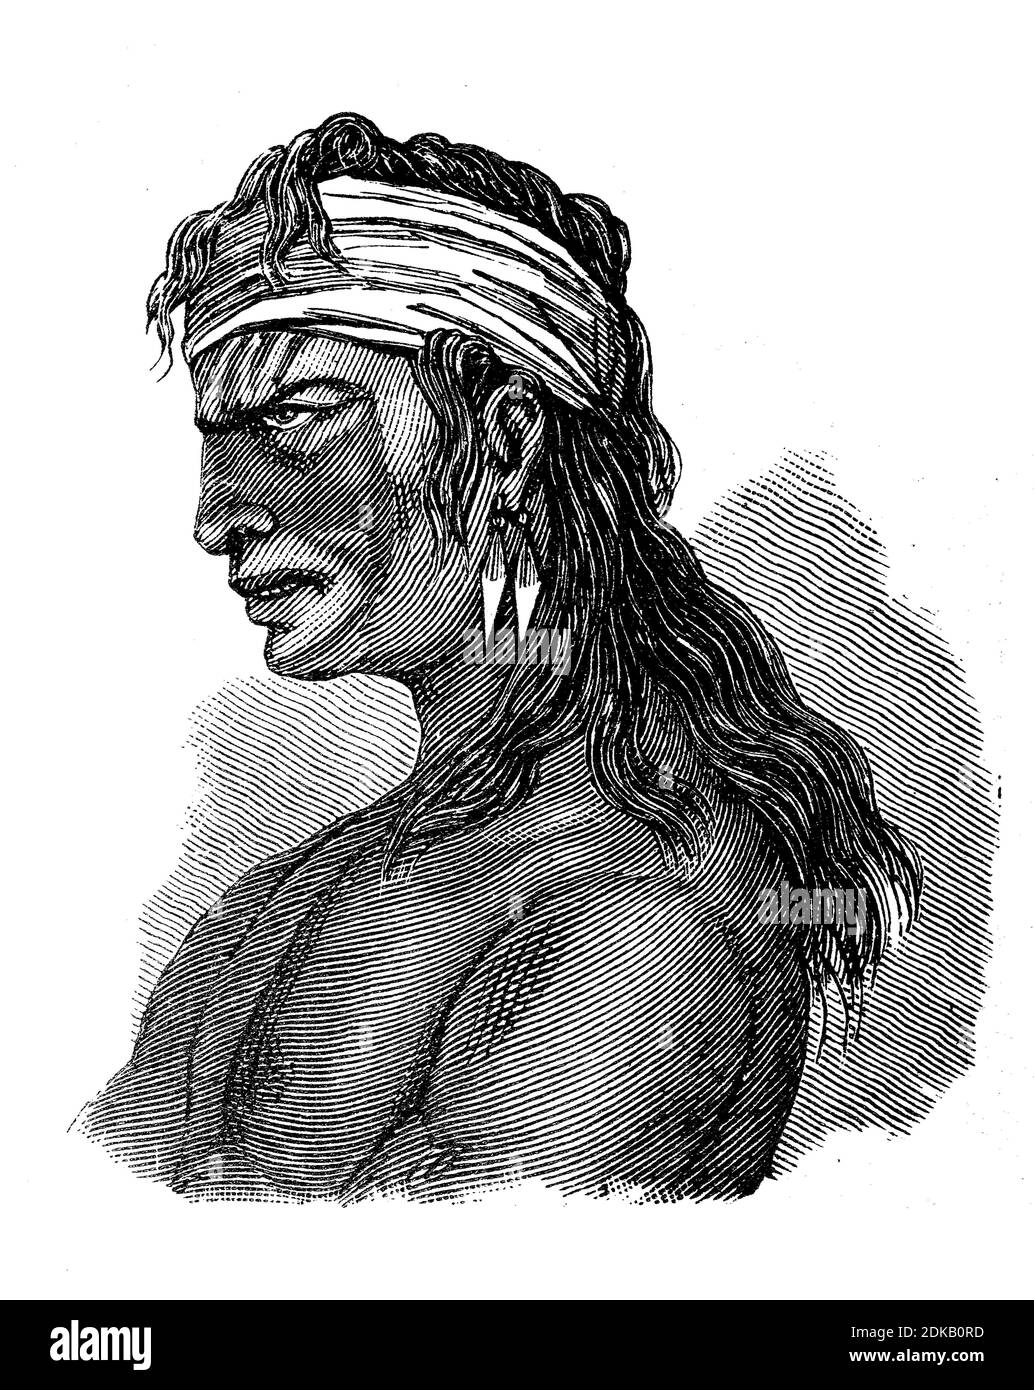 Indian, here a man from Patagonia, South America, illustration from 1880  /  Indianer, hier ein Mann aus Patagonien, Südamerika, Illustration aus 1880, Historisch, historical, digital improved reproduction of an original from the 19th century / digitale Reproduktion einer Originalvorlage aus dem 19. Jahrhundert Stock Photo